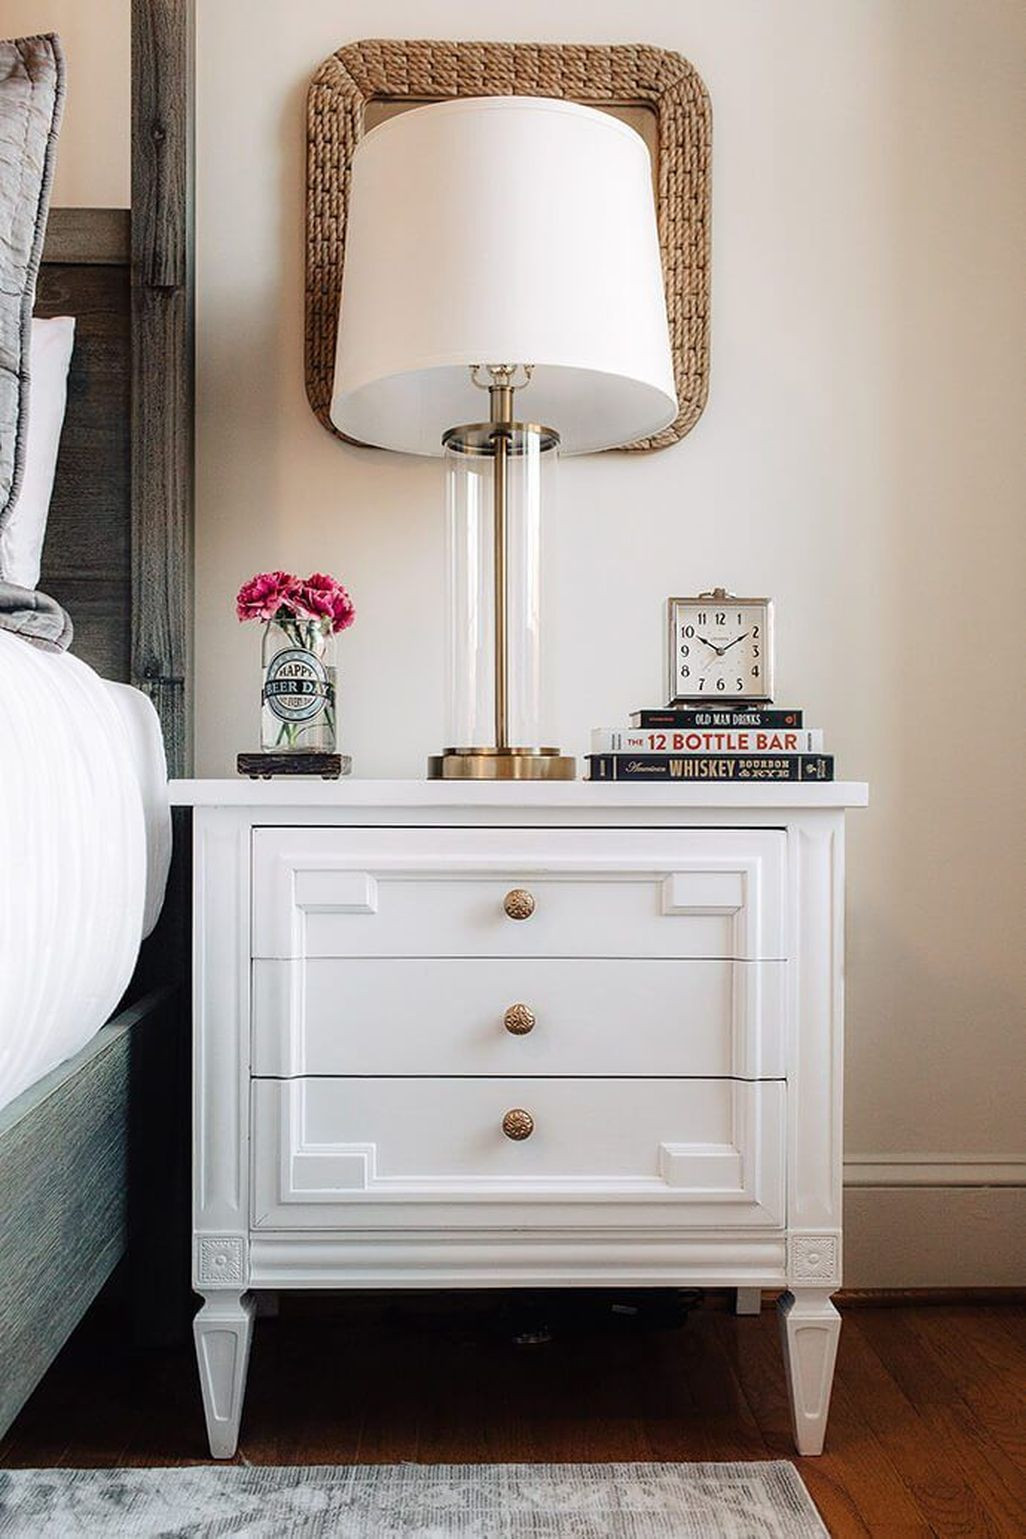 Interesting Nightstand Designs 44 Extremely Interesting Nightstand Designs for Your